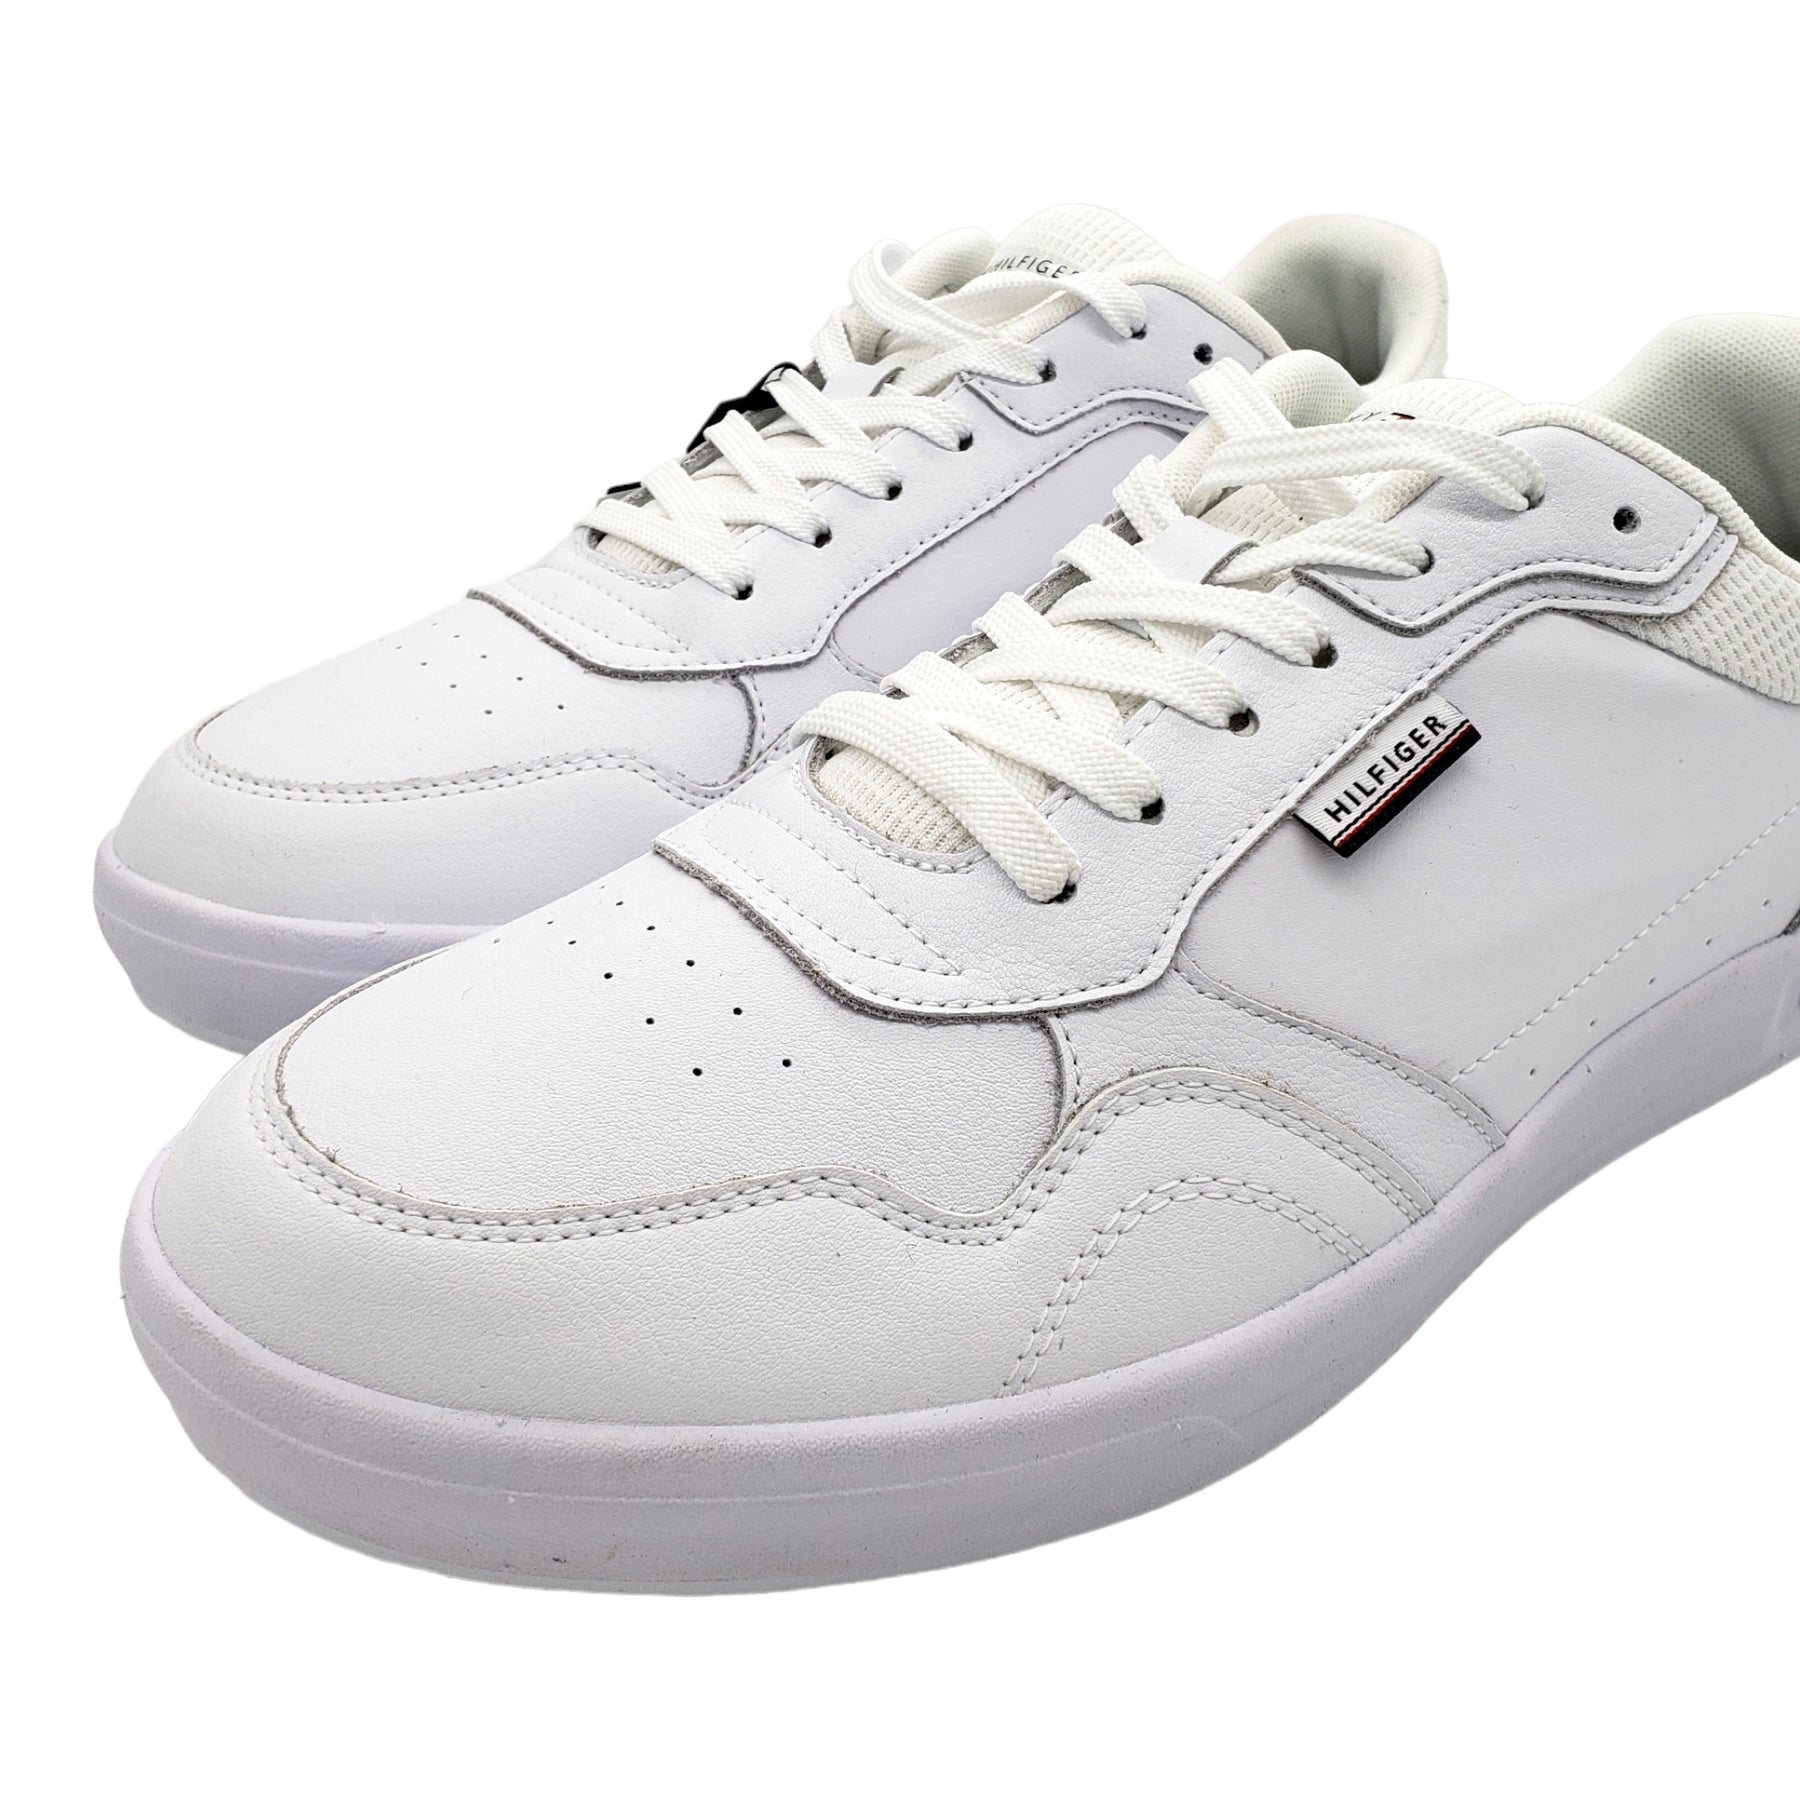 Tommy Hilfiger White Leather Cupsole Trainers